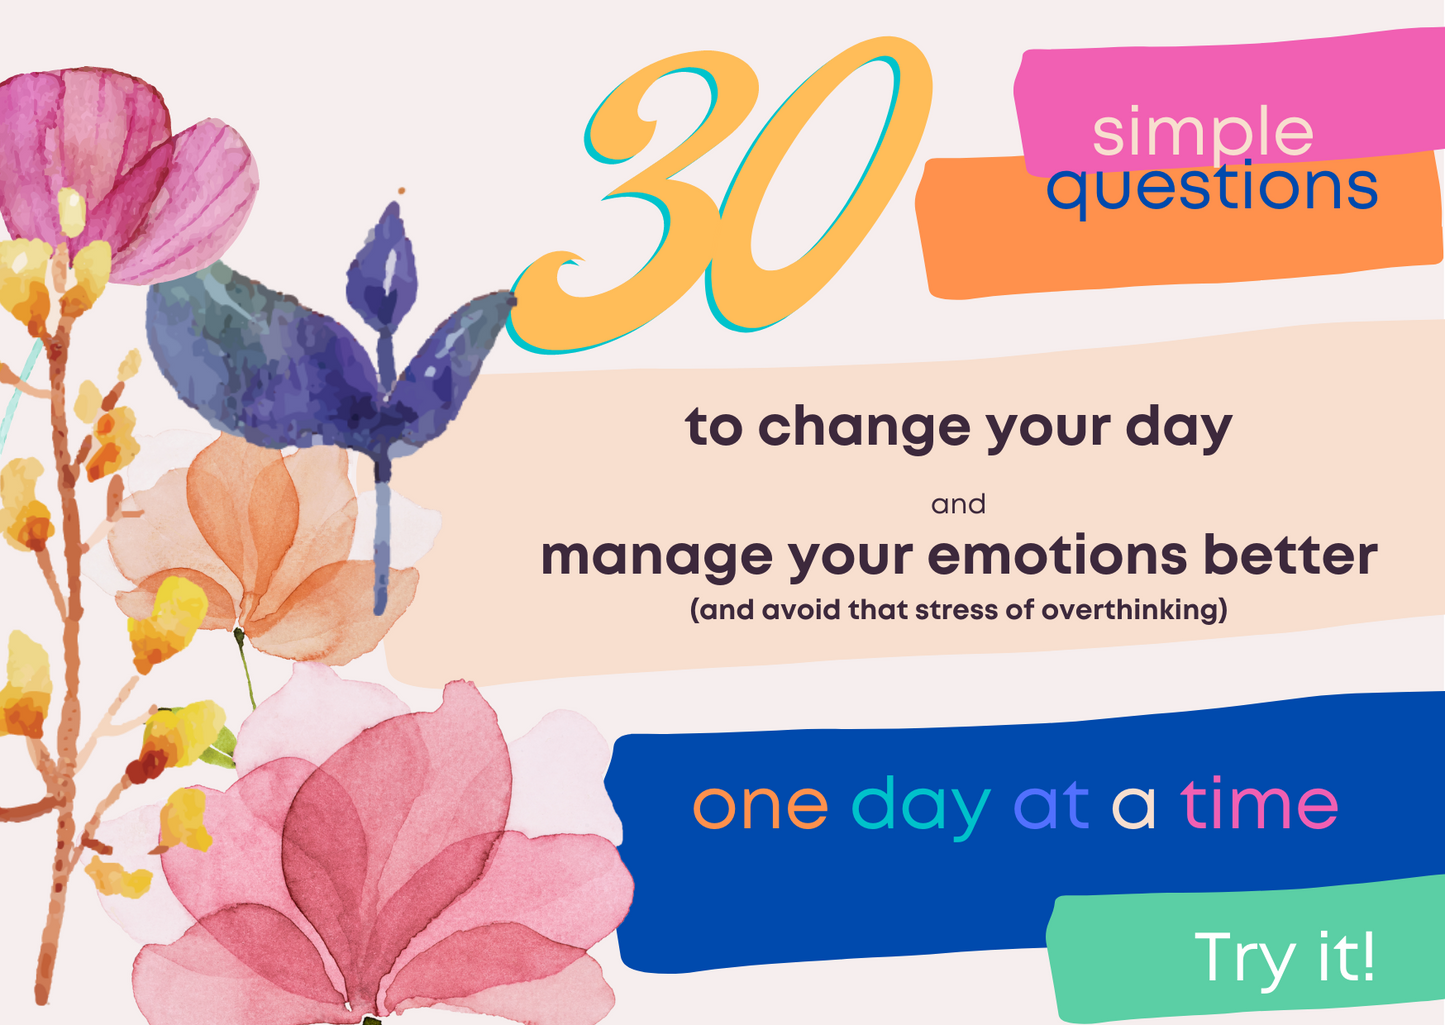 3 Simple Questions to change your mood